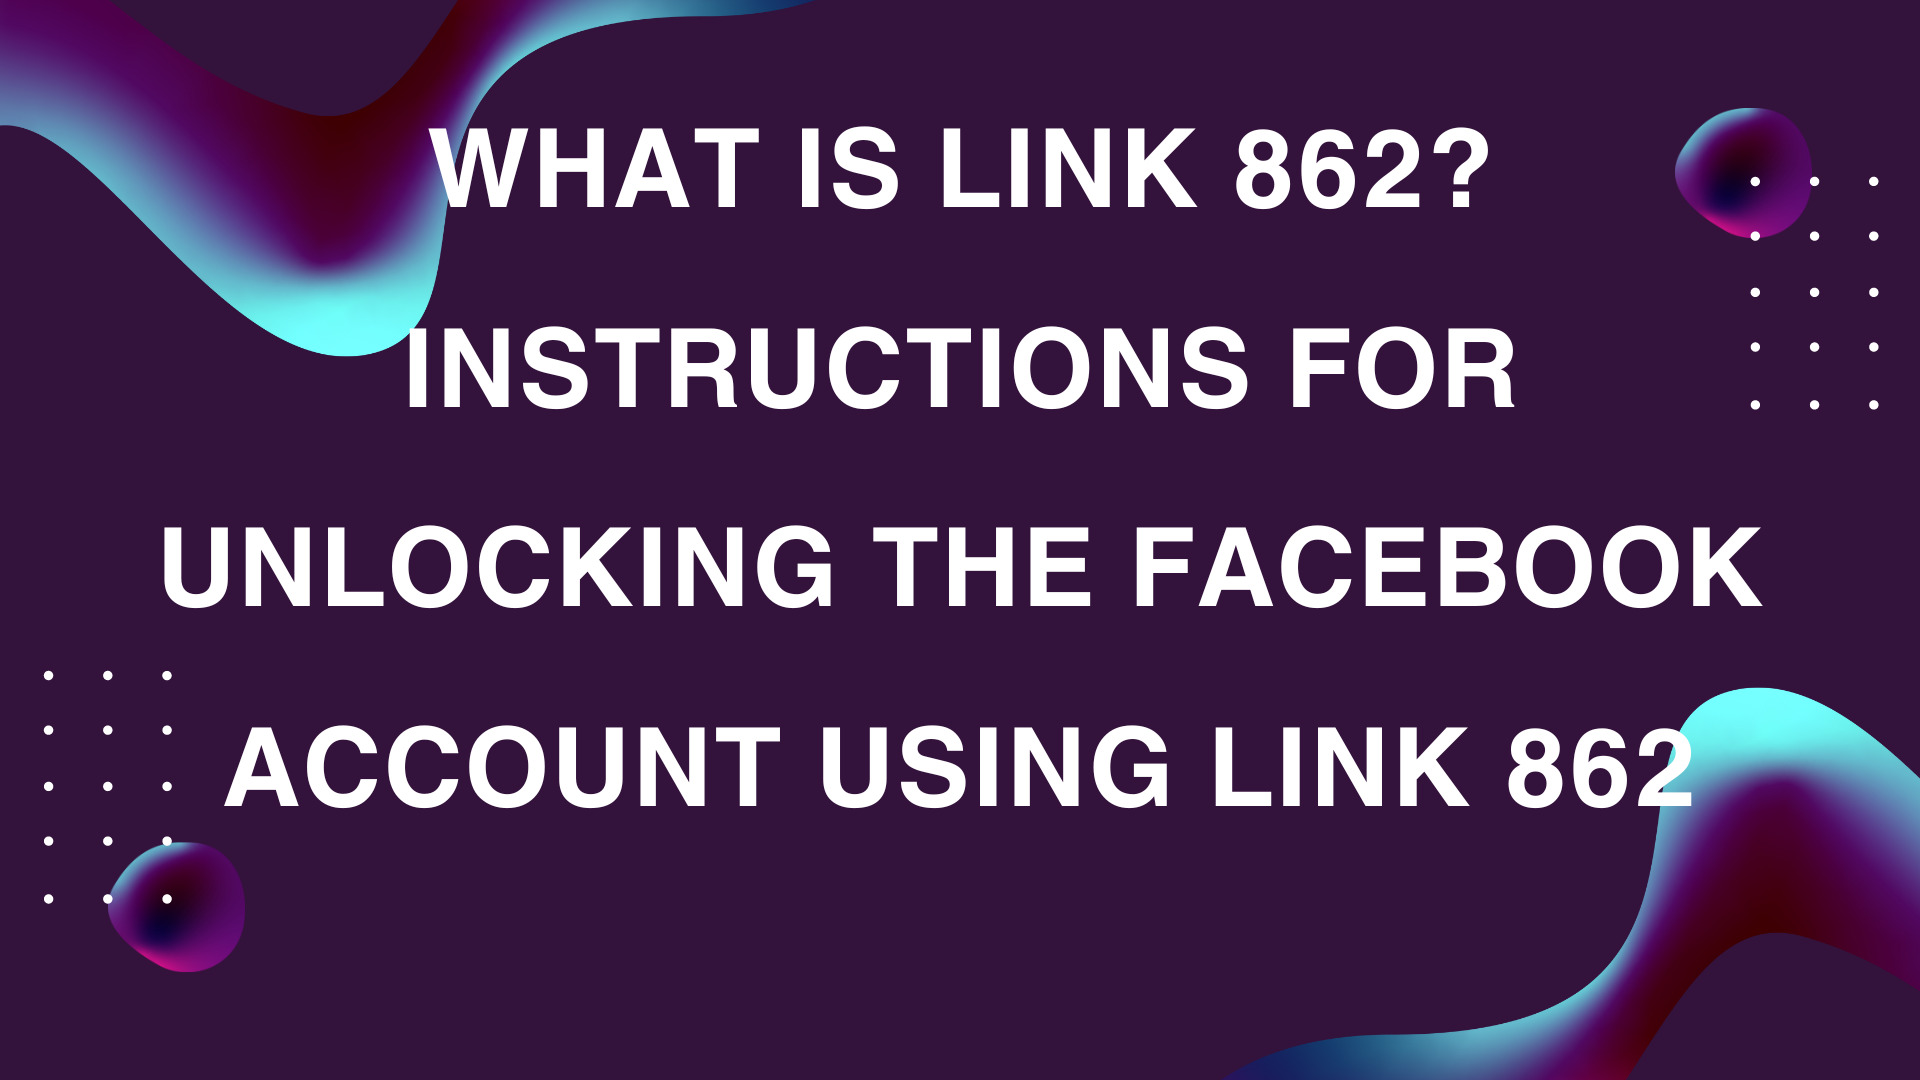 What is Link 862? Instructions for unlocking the Facebook account using link 862